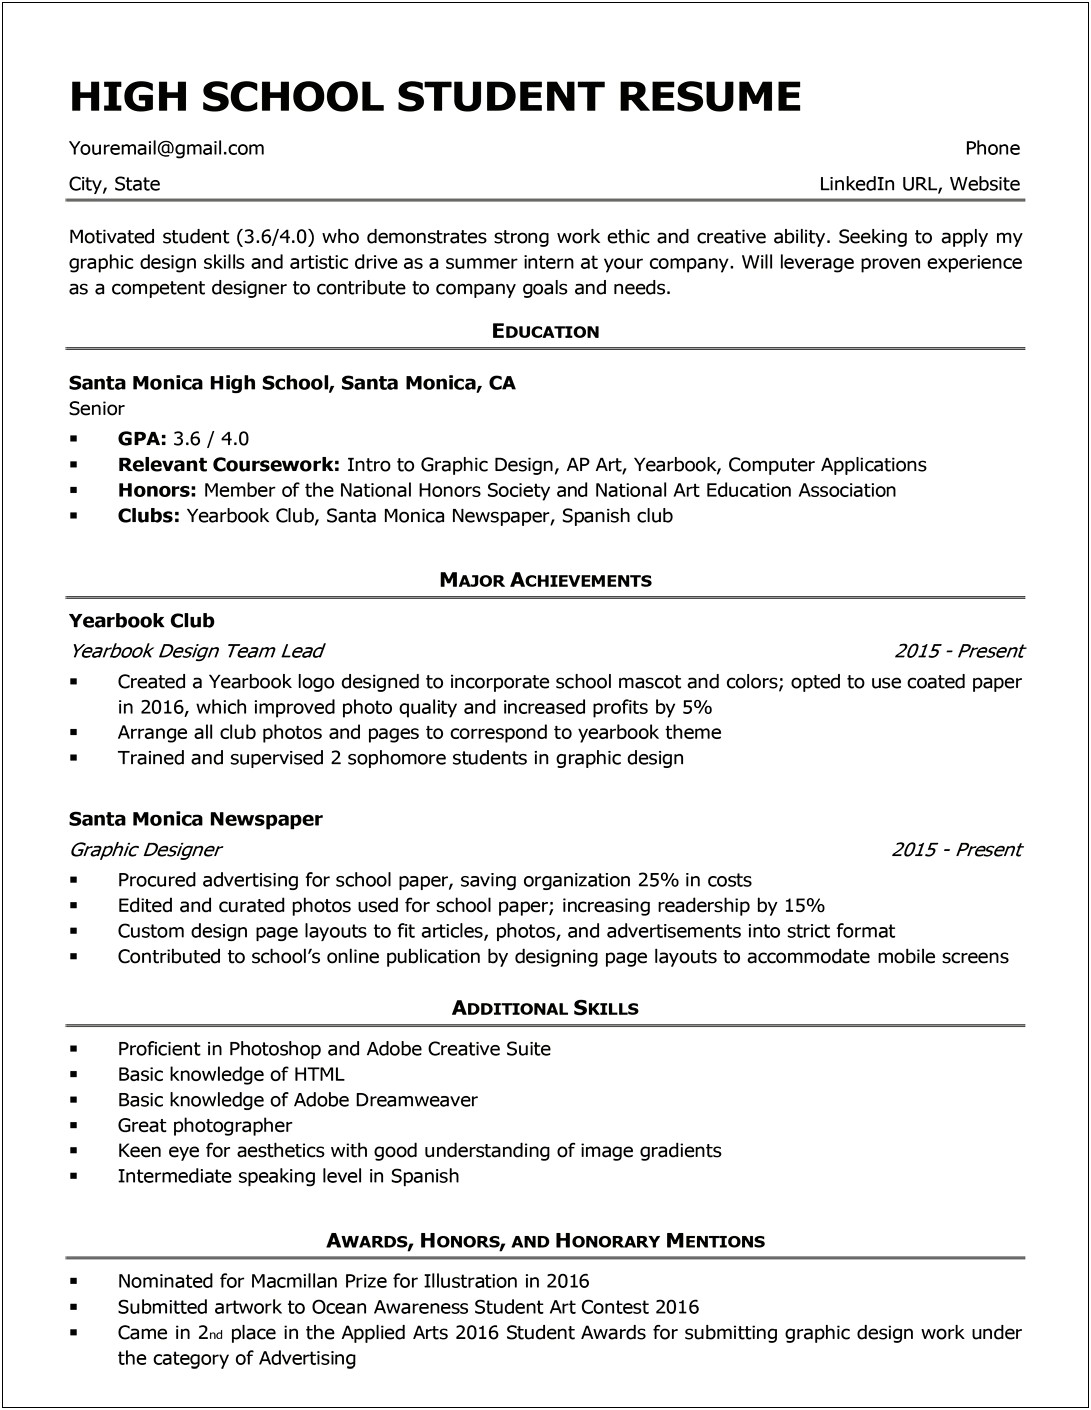 Entry Level Proffersional Summer Pogrammer Resume Examples